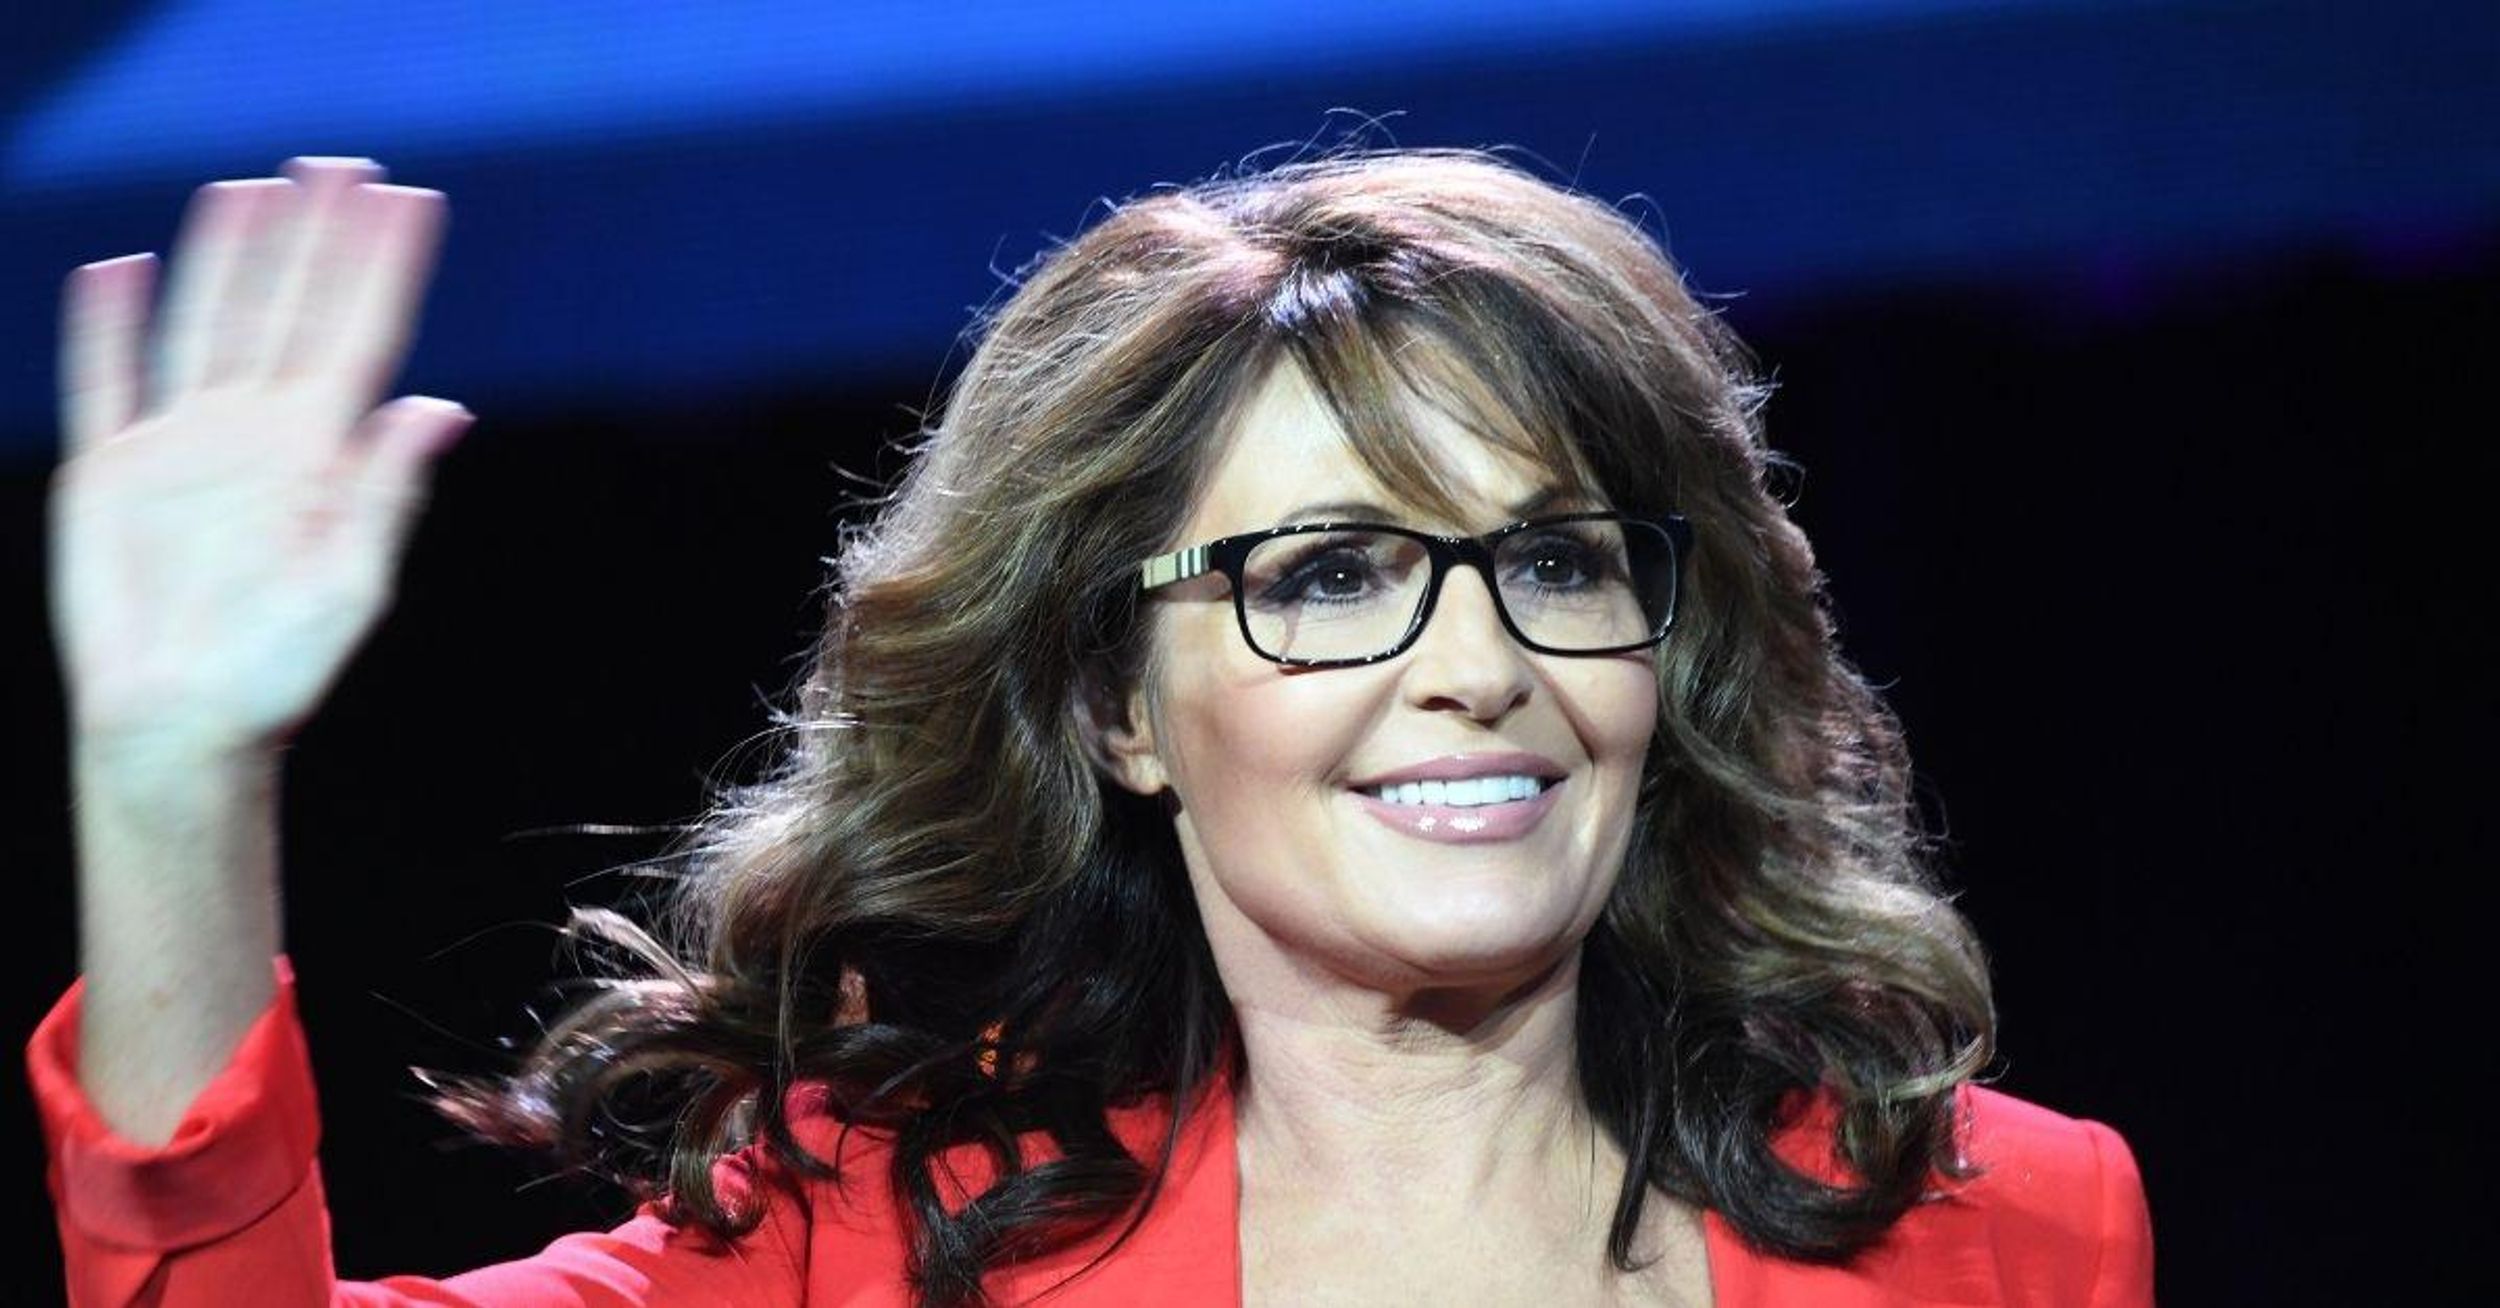 Sarah Palin Says She'd Step In To Fill Late Alaska Rep's Seat 'In A Heartbeat'—And Twitter Is Screaming